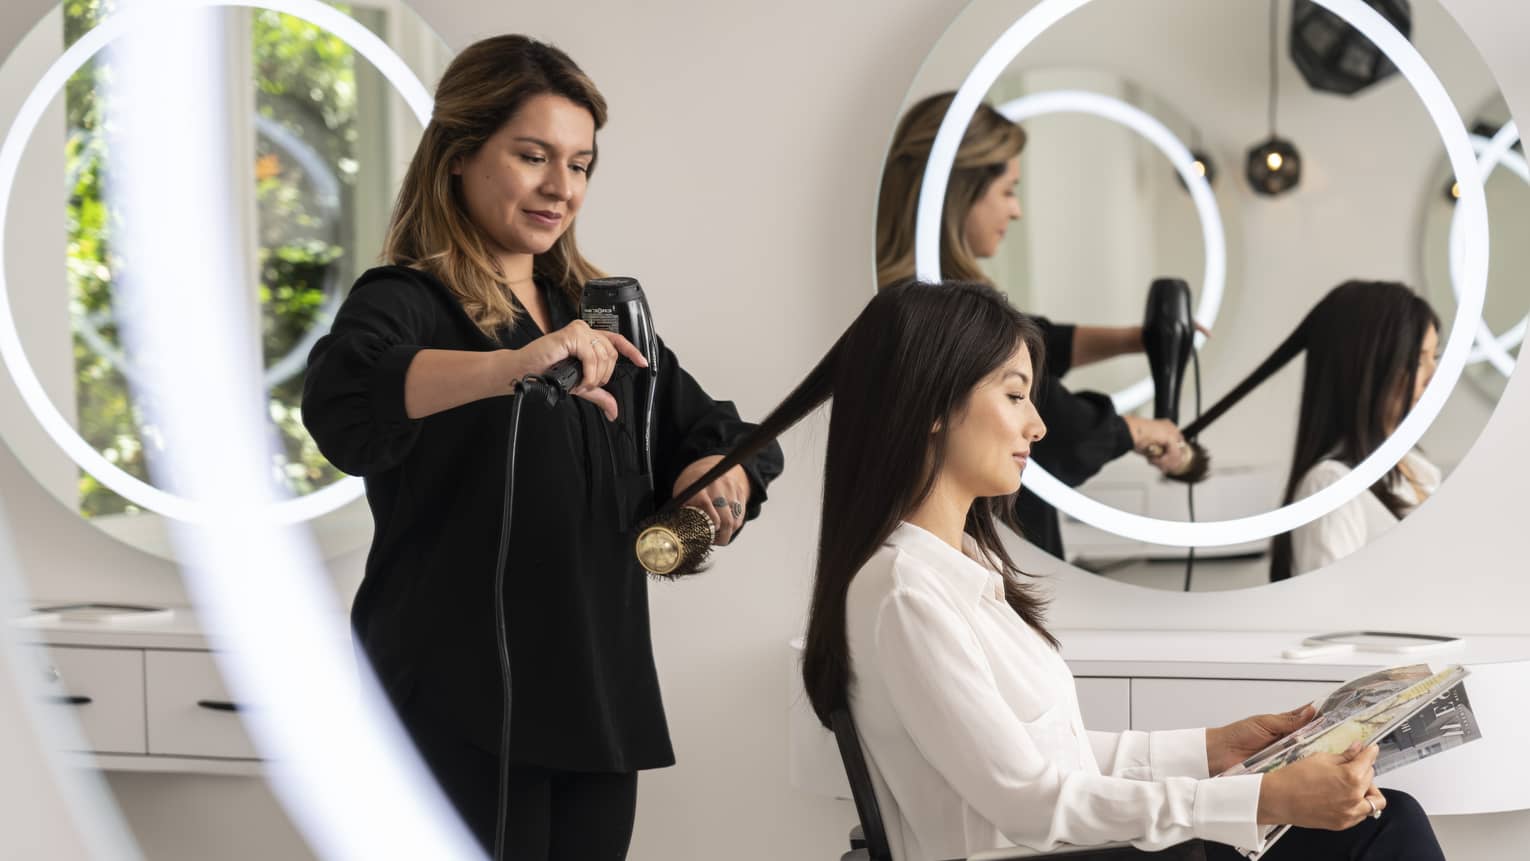 A stylist blow drying a woman's hair while she sits at a salon.